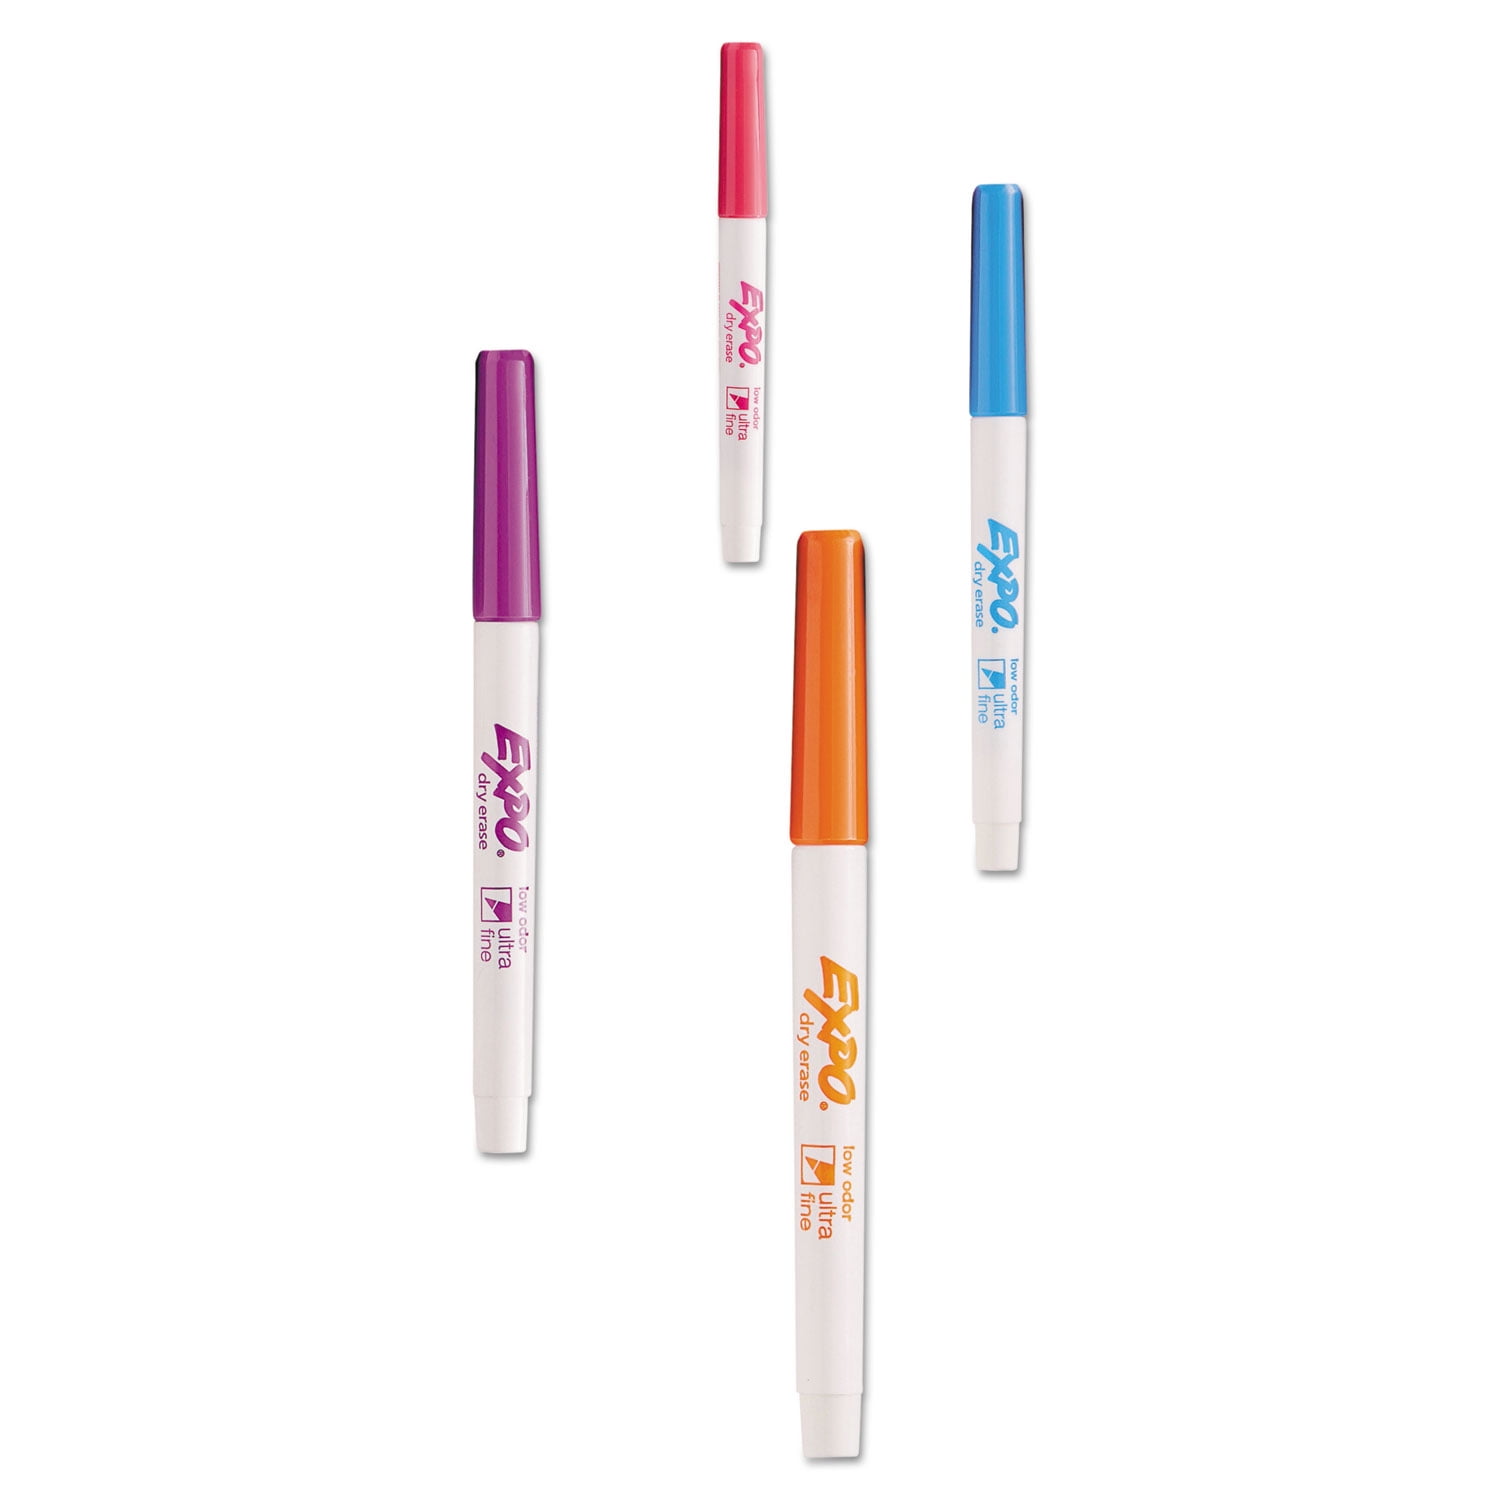 Expo® Low Odor Intense Color Dry Erase Fine Tip Markers, 4 pk - Harris  Teeter